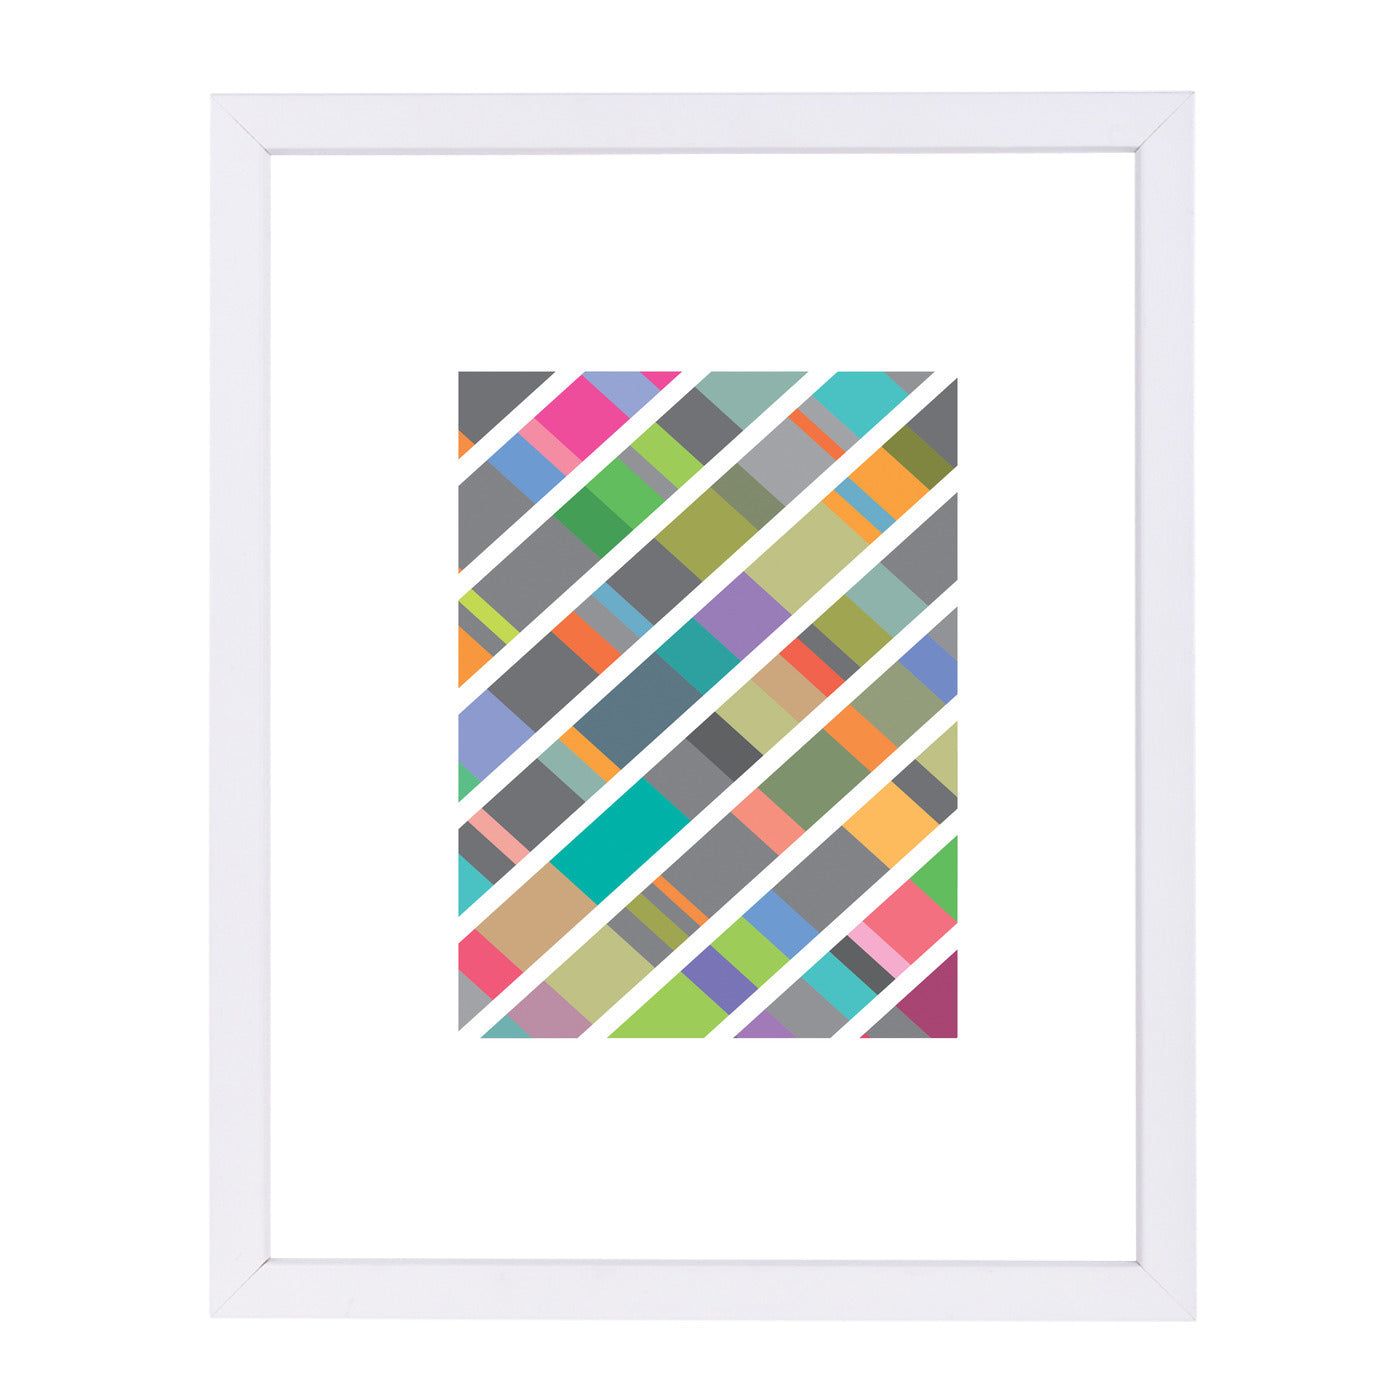 Dna 2 by Visual Philosophy Framed Print - Americanflat